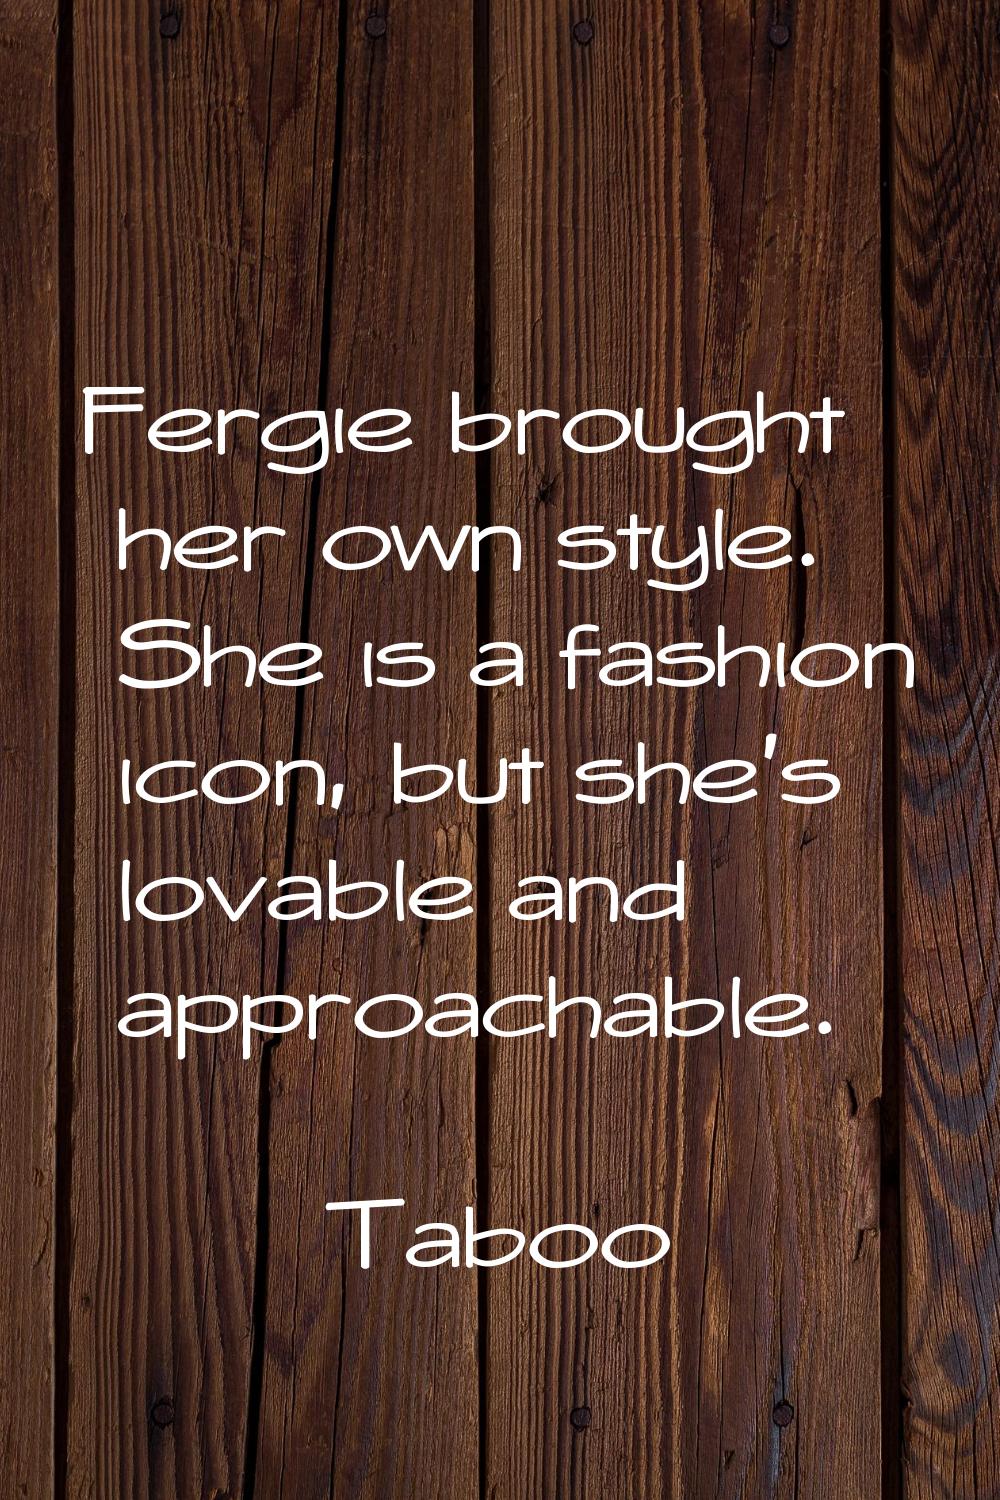 Fergie brought her own style. She is a fashion icon, but she's lovable and approachable.